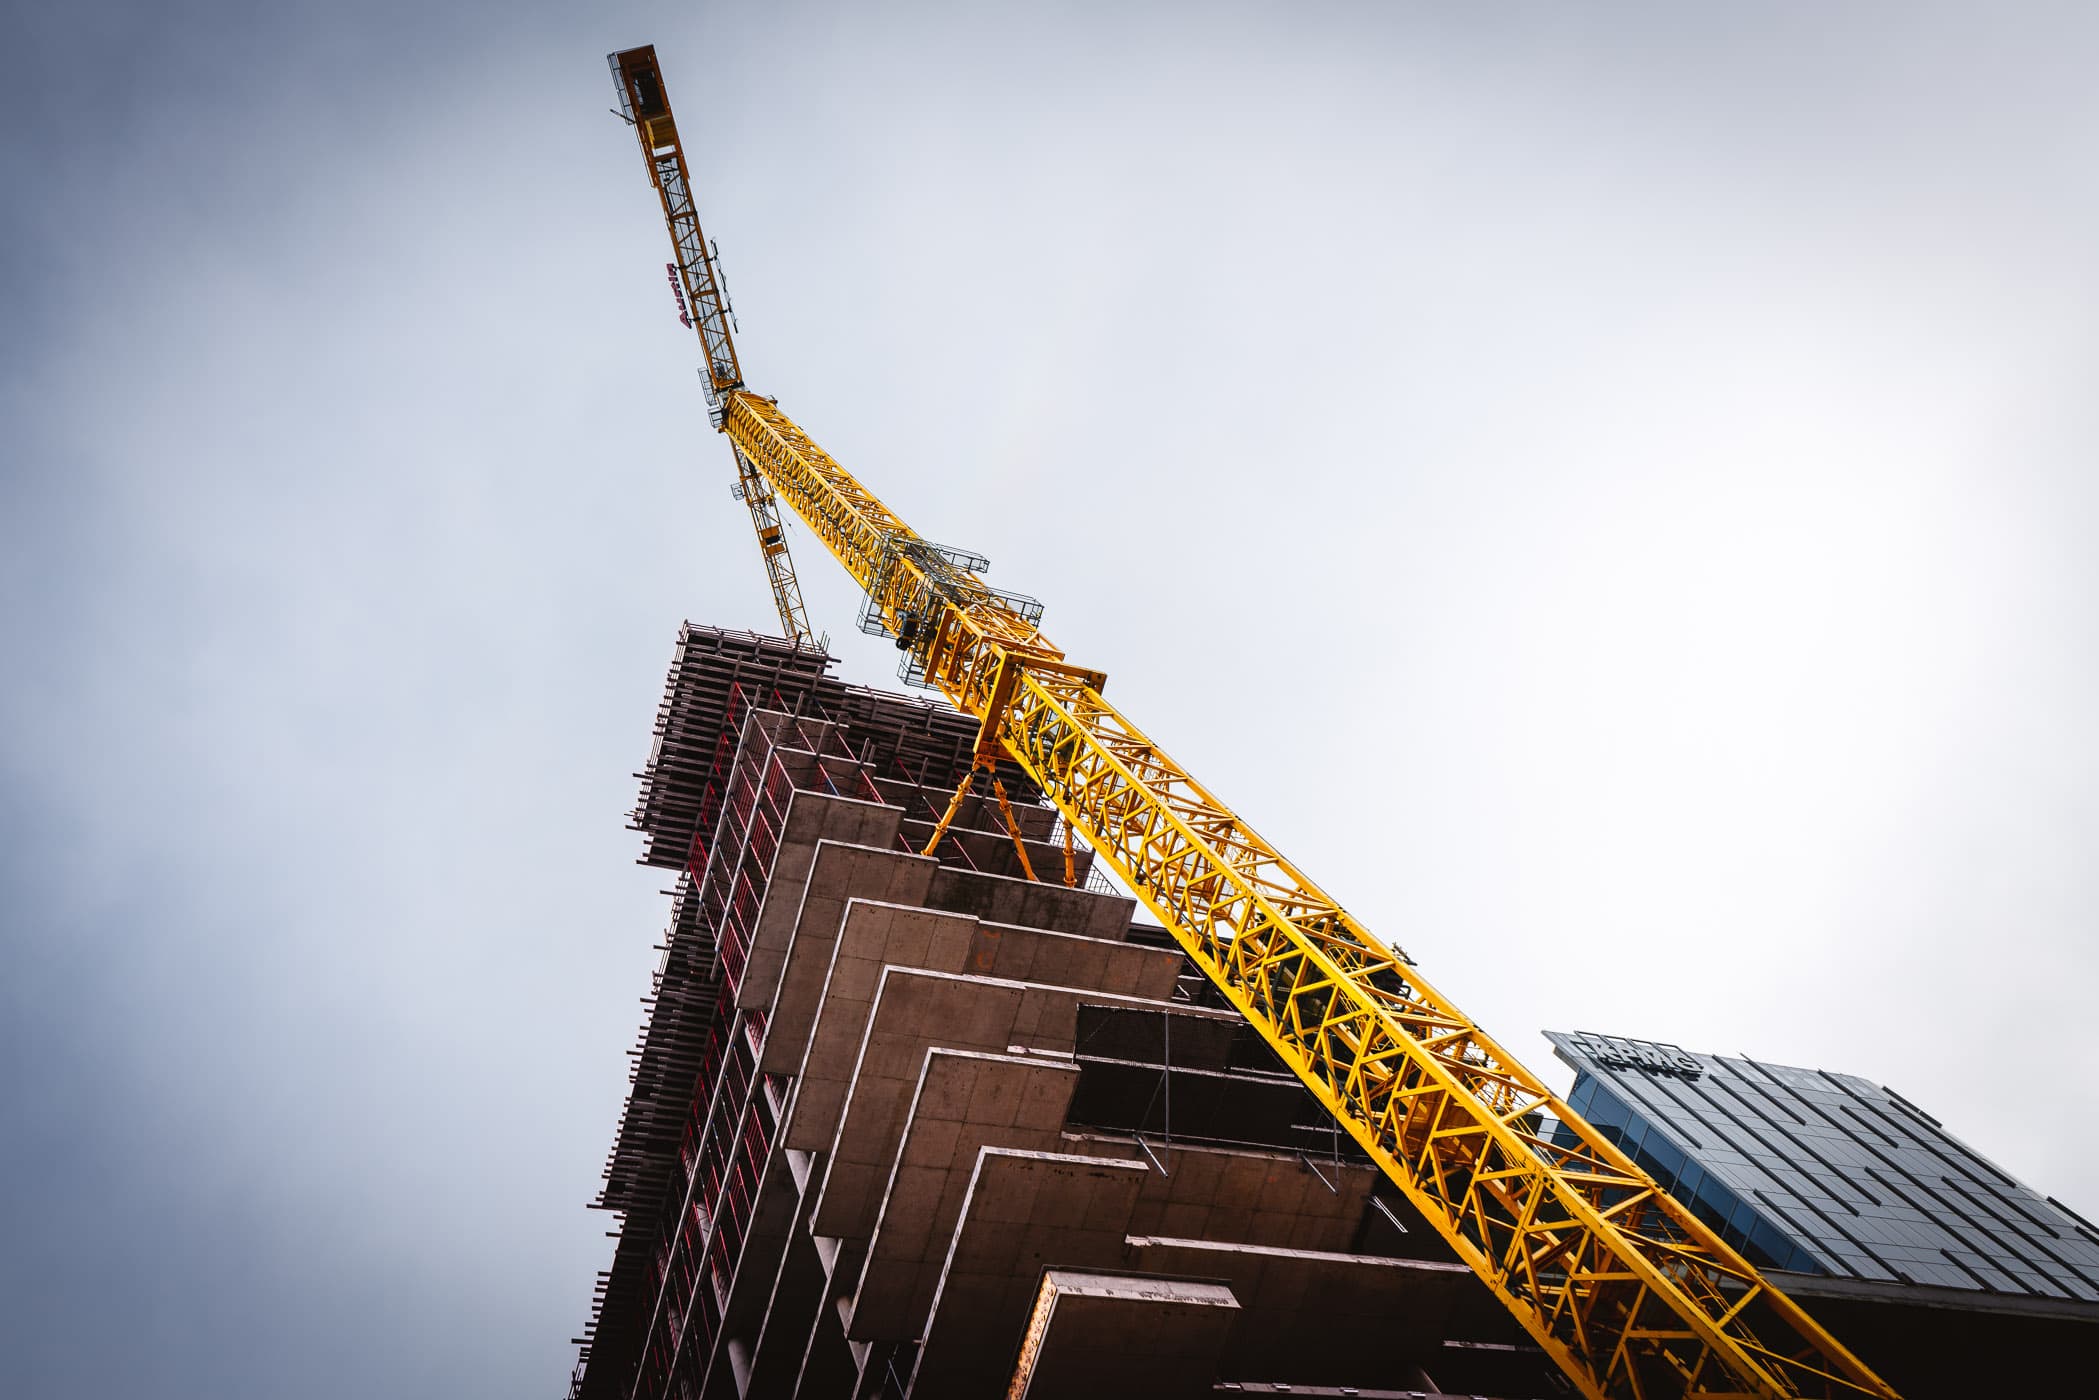 A tower crane at a Downtown Dallas construction site.